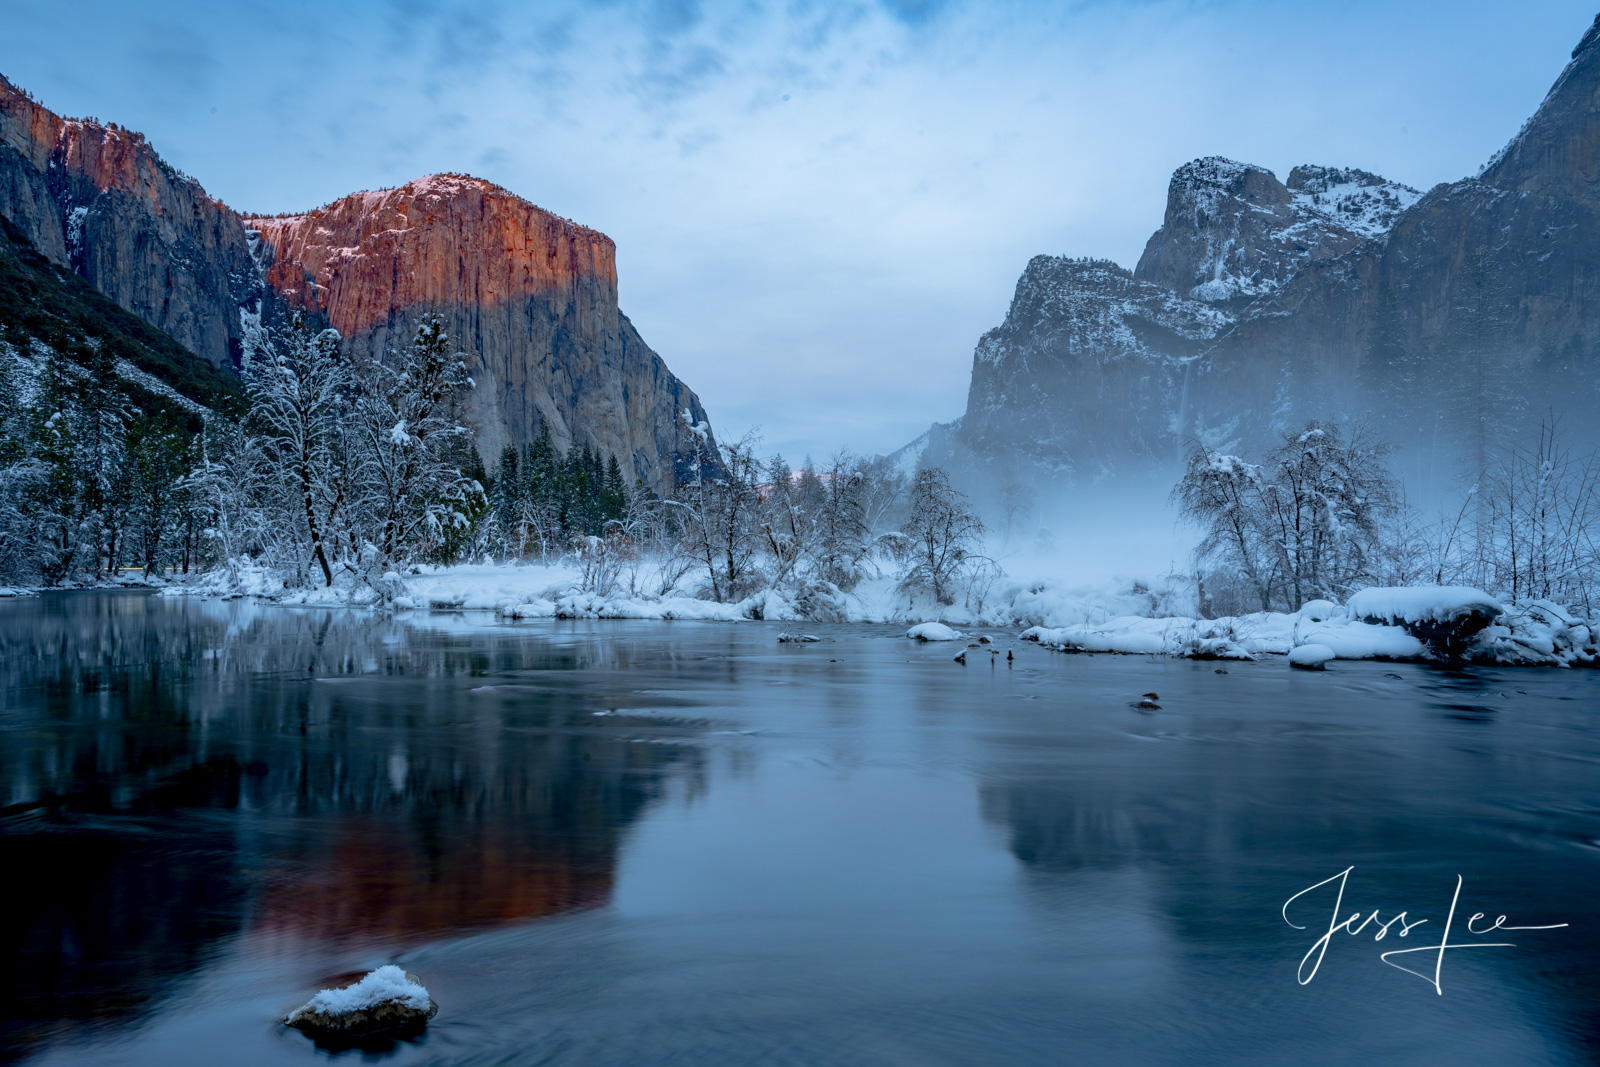 1 of 200 California Landscape Prints of a Winter View of Yosemite valley. This is part of the luxurious collection of fine art...